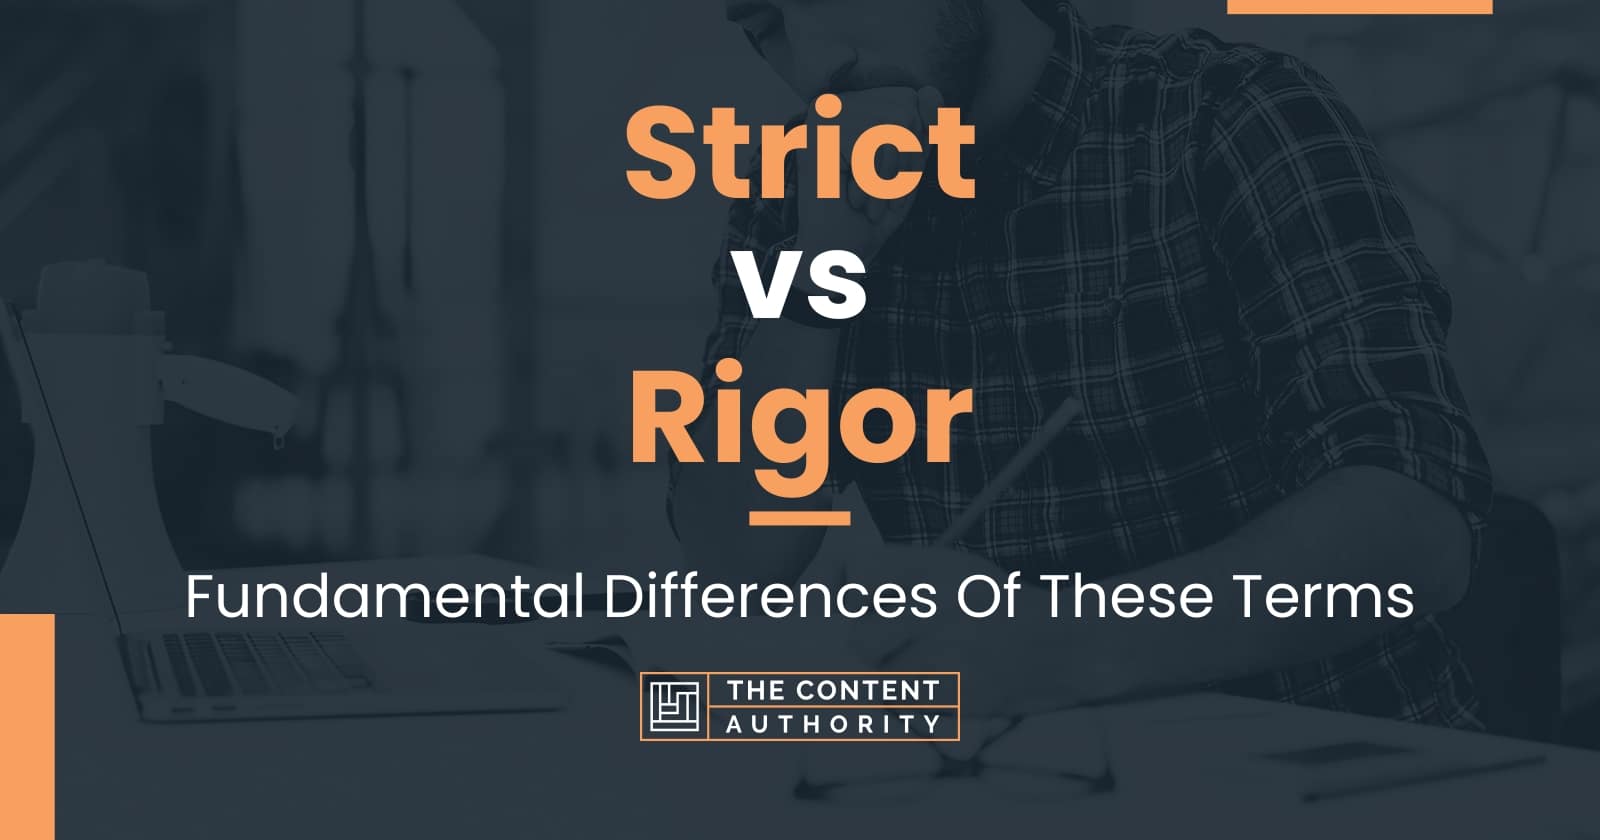 Strict vs Rigor: Fundamental Differences Of These Terms